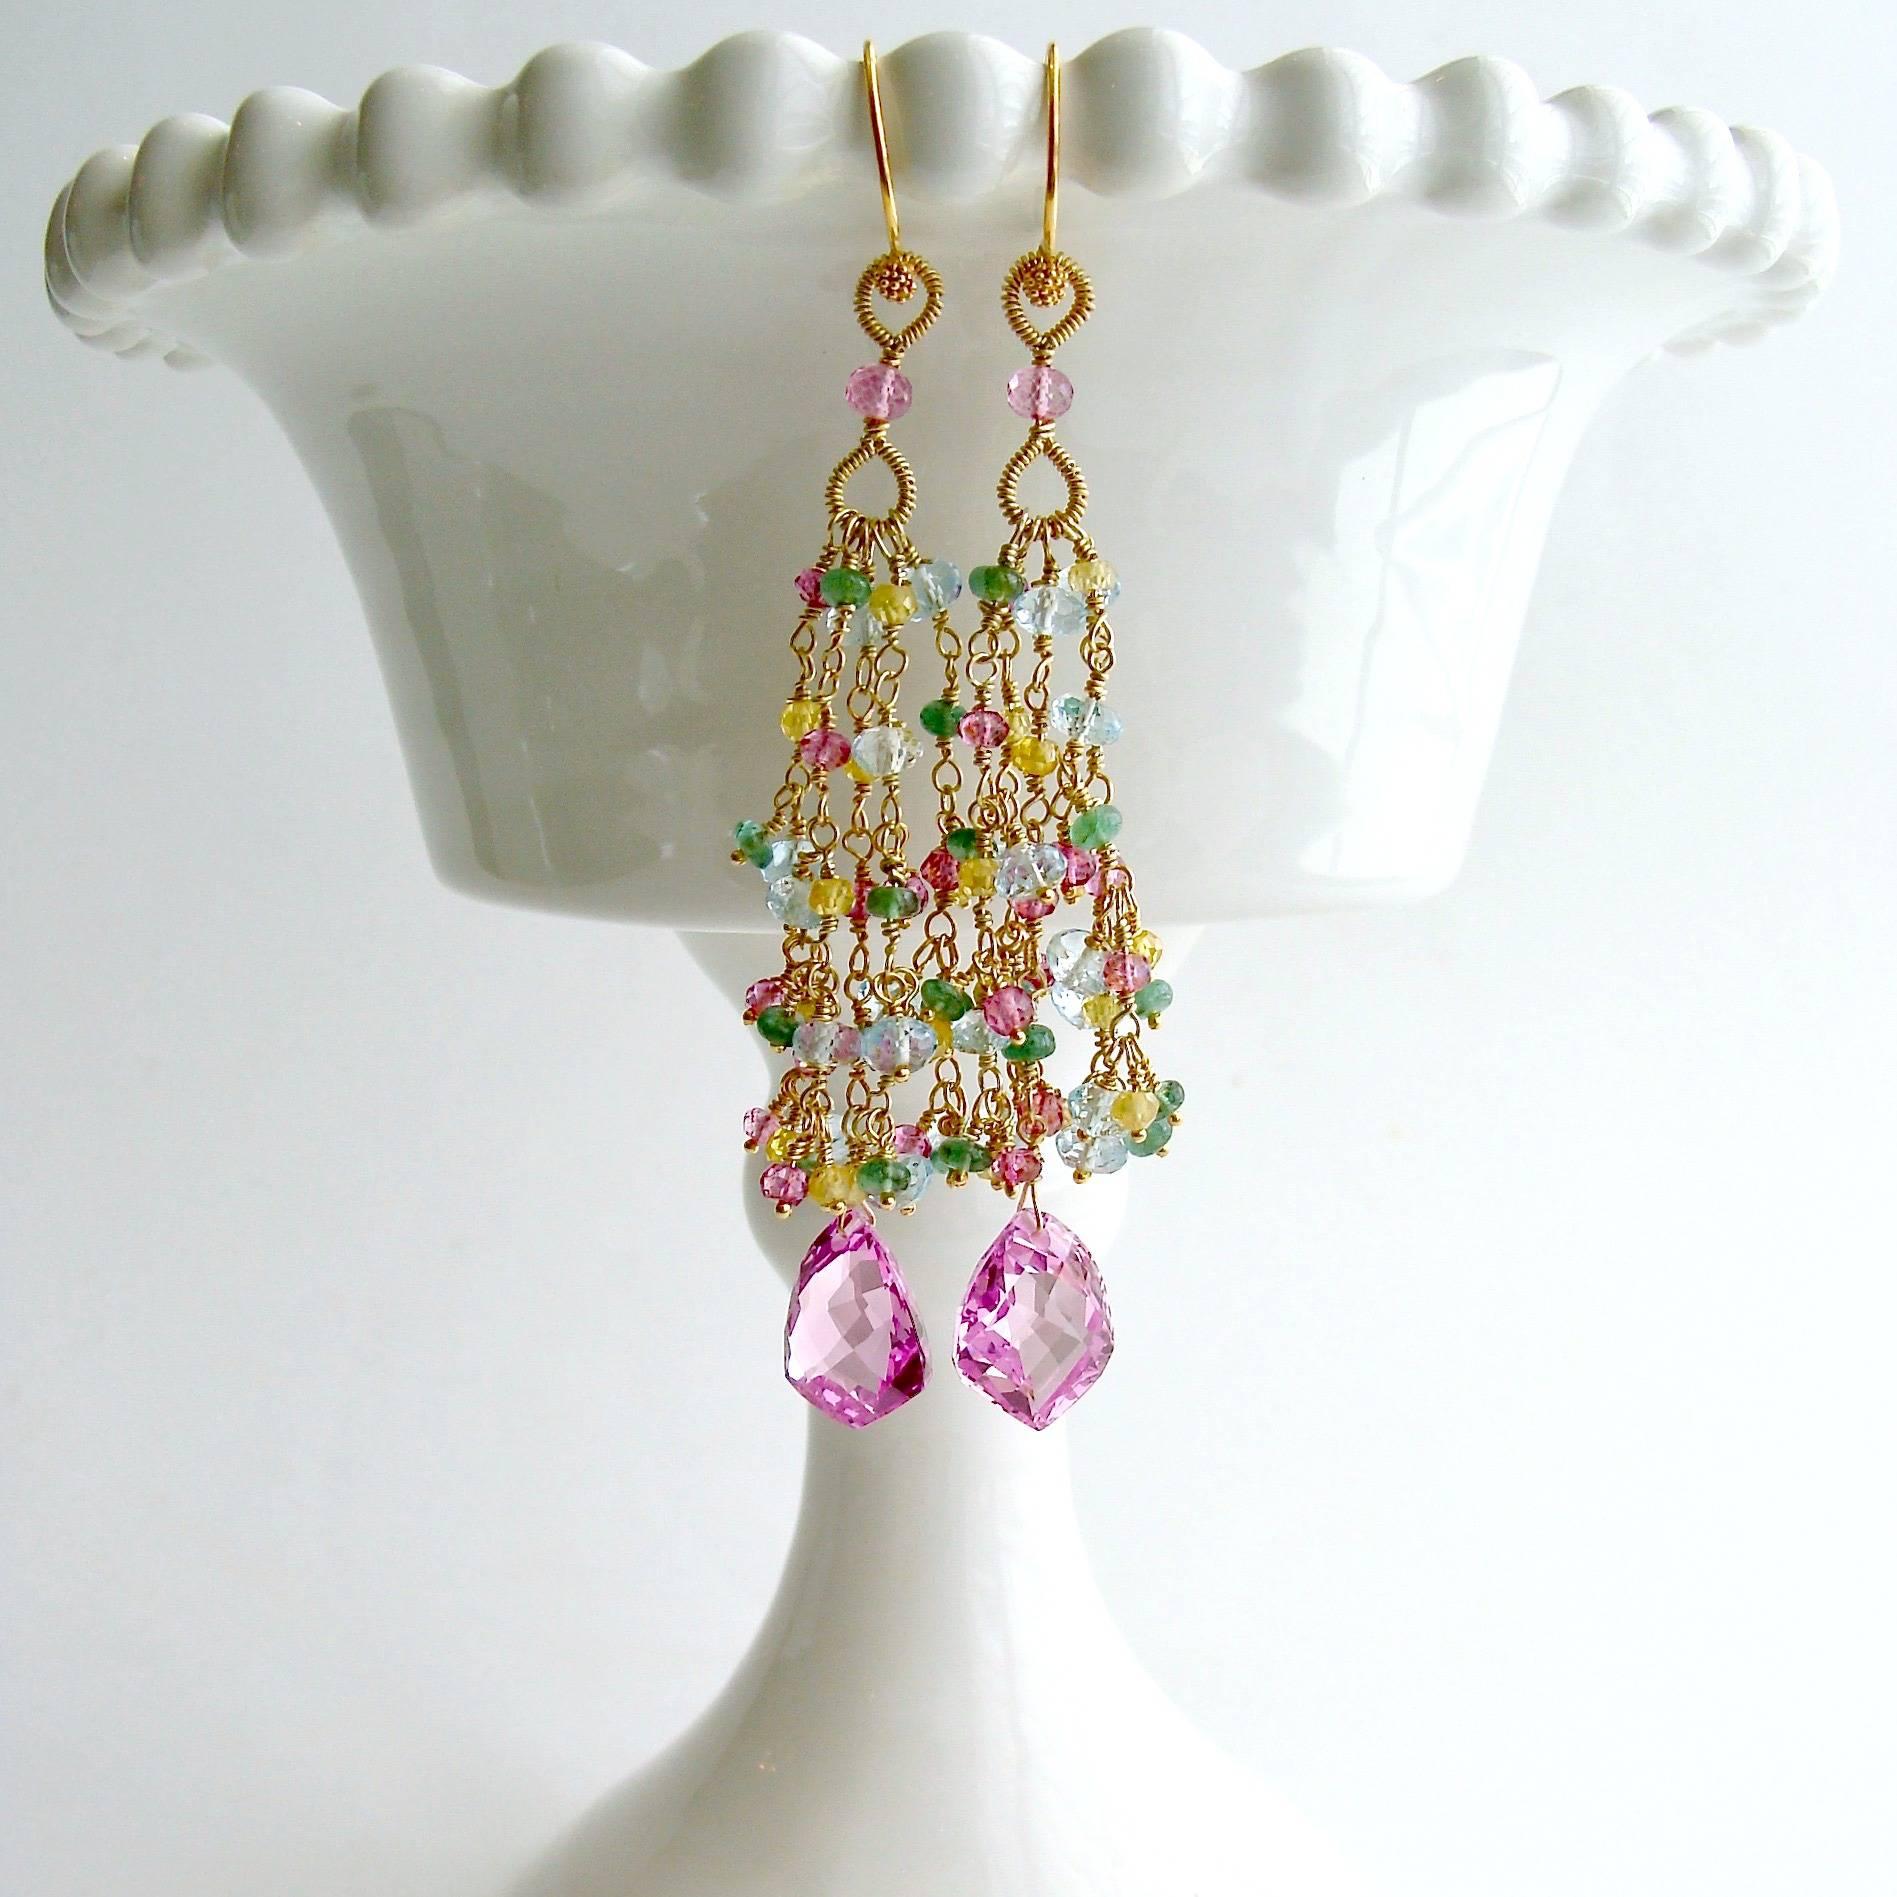 Delphine Tassel Earrings.

Gorgeous shield-shaped pink topaz focal beads are crowned with cascading tendrils of hand linked pink and blue topaz, emerald and yellow zircon rondelles, to create these elongated duster style tassel earrings.  The hand